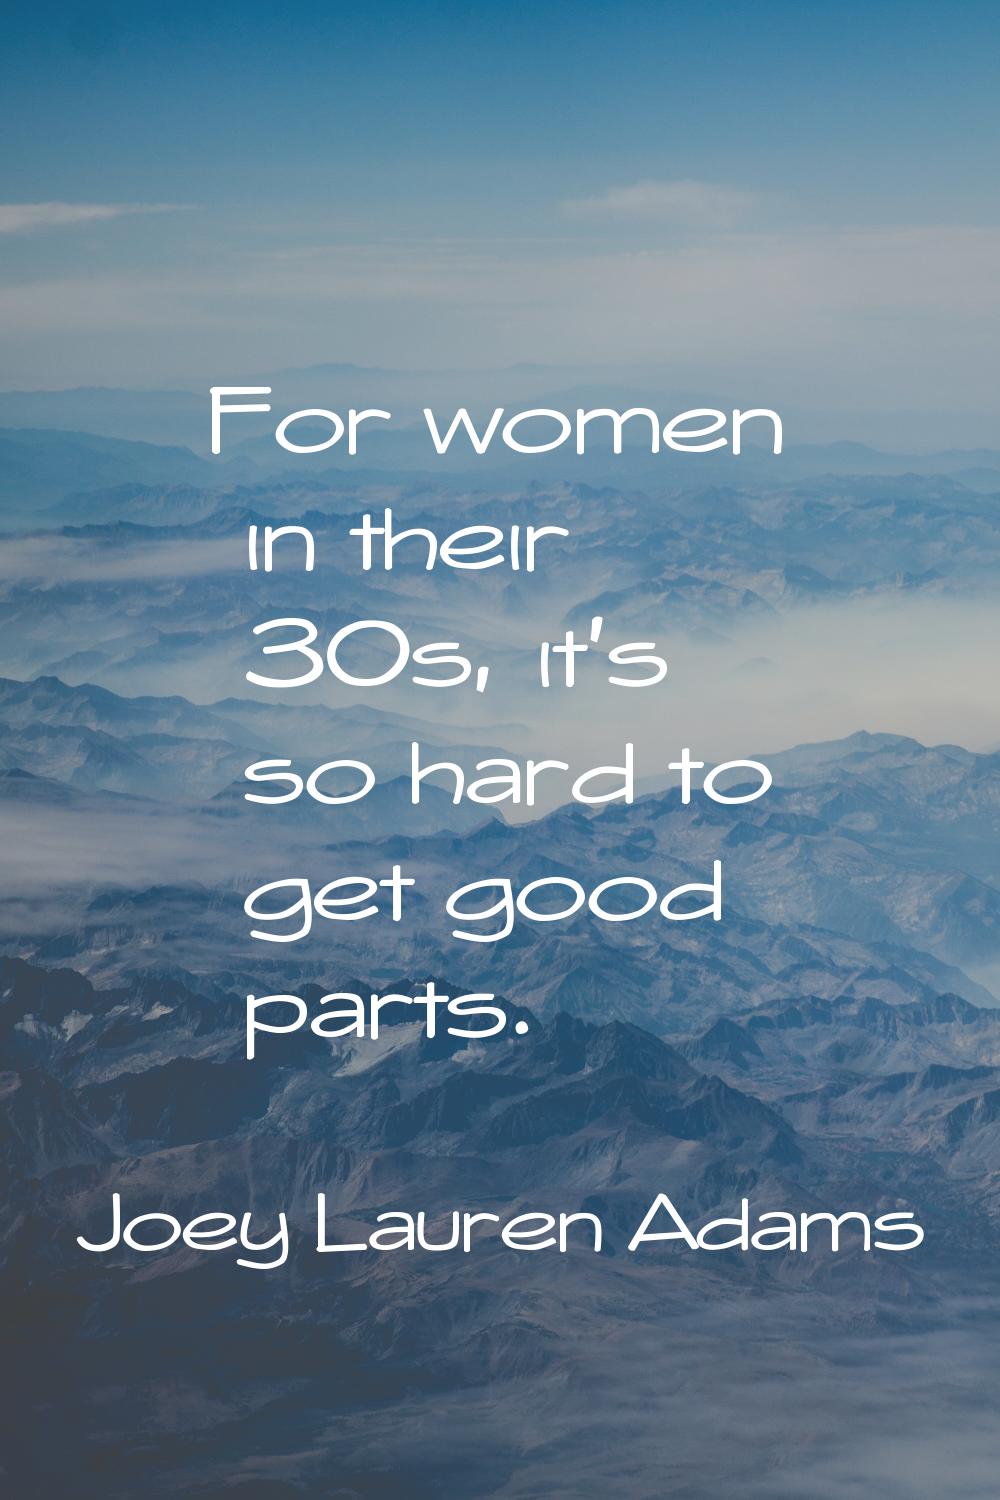 For women in their 30s, it's so hard to get good parts.